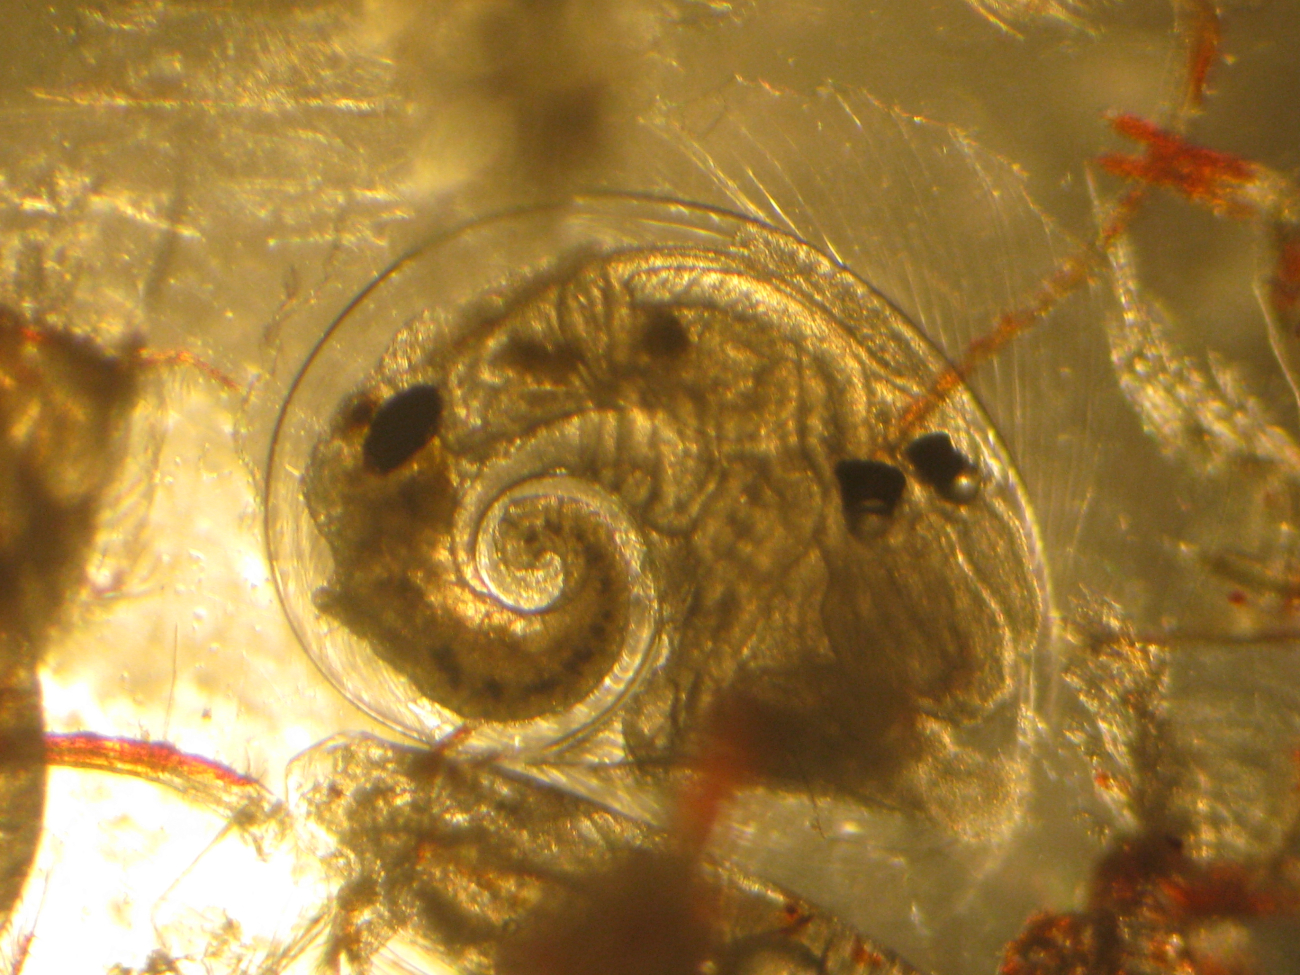 Through the microscope - pteropod shell